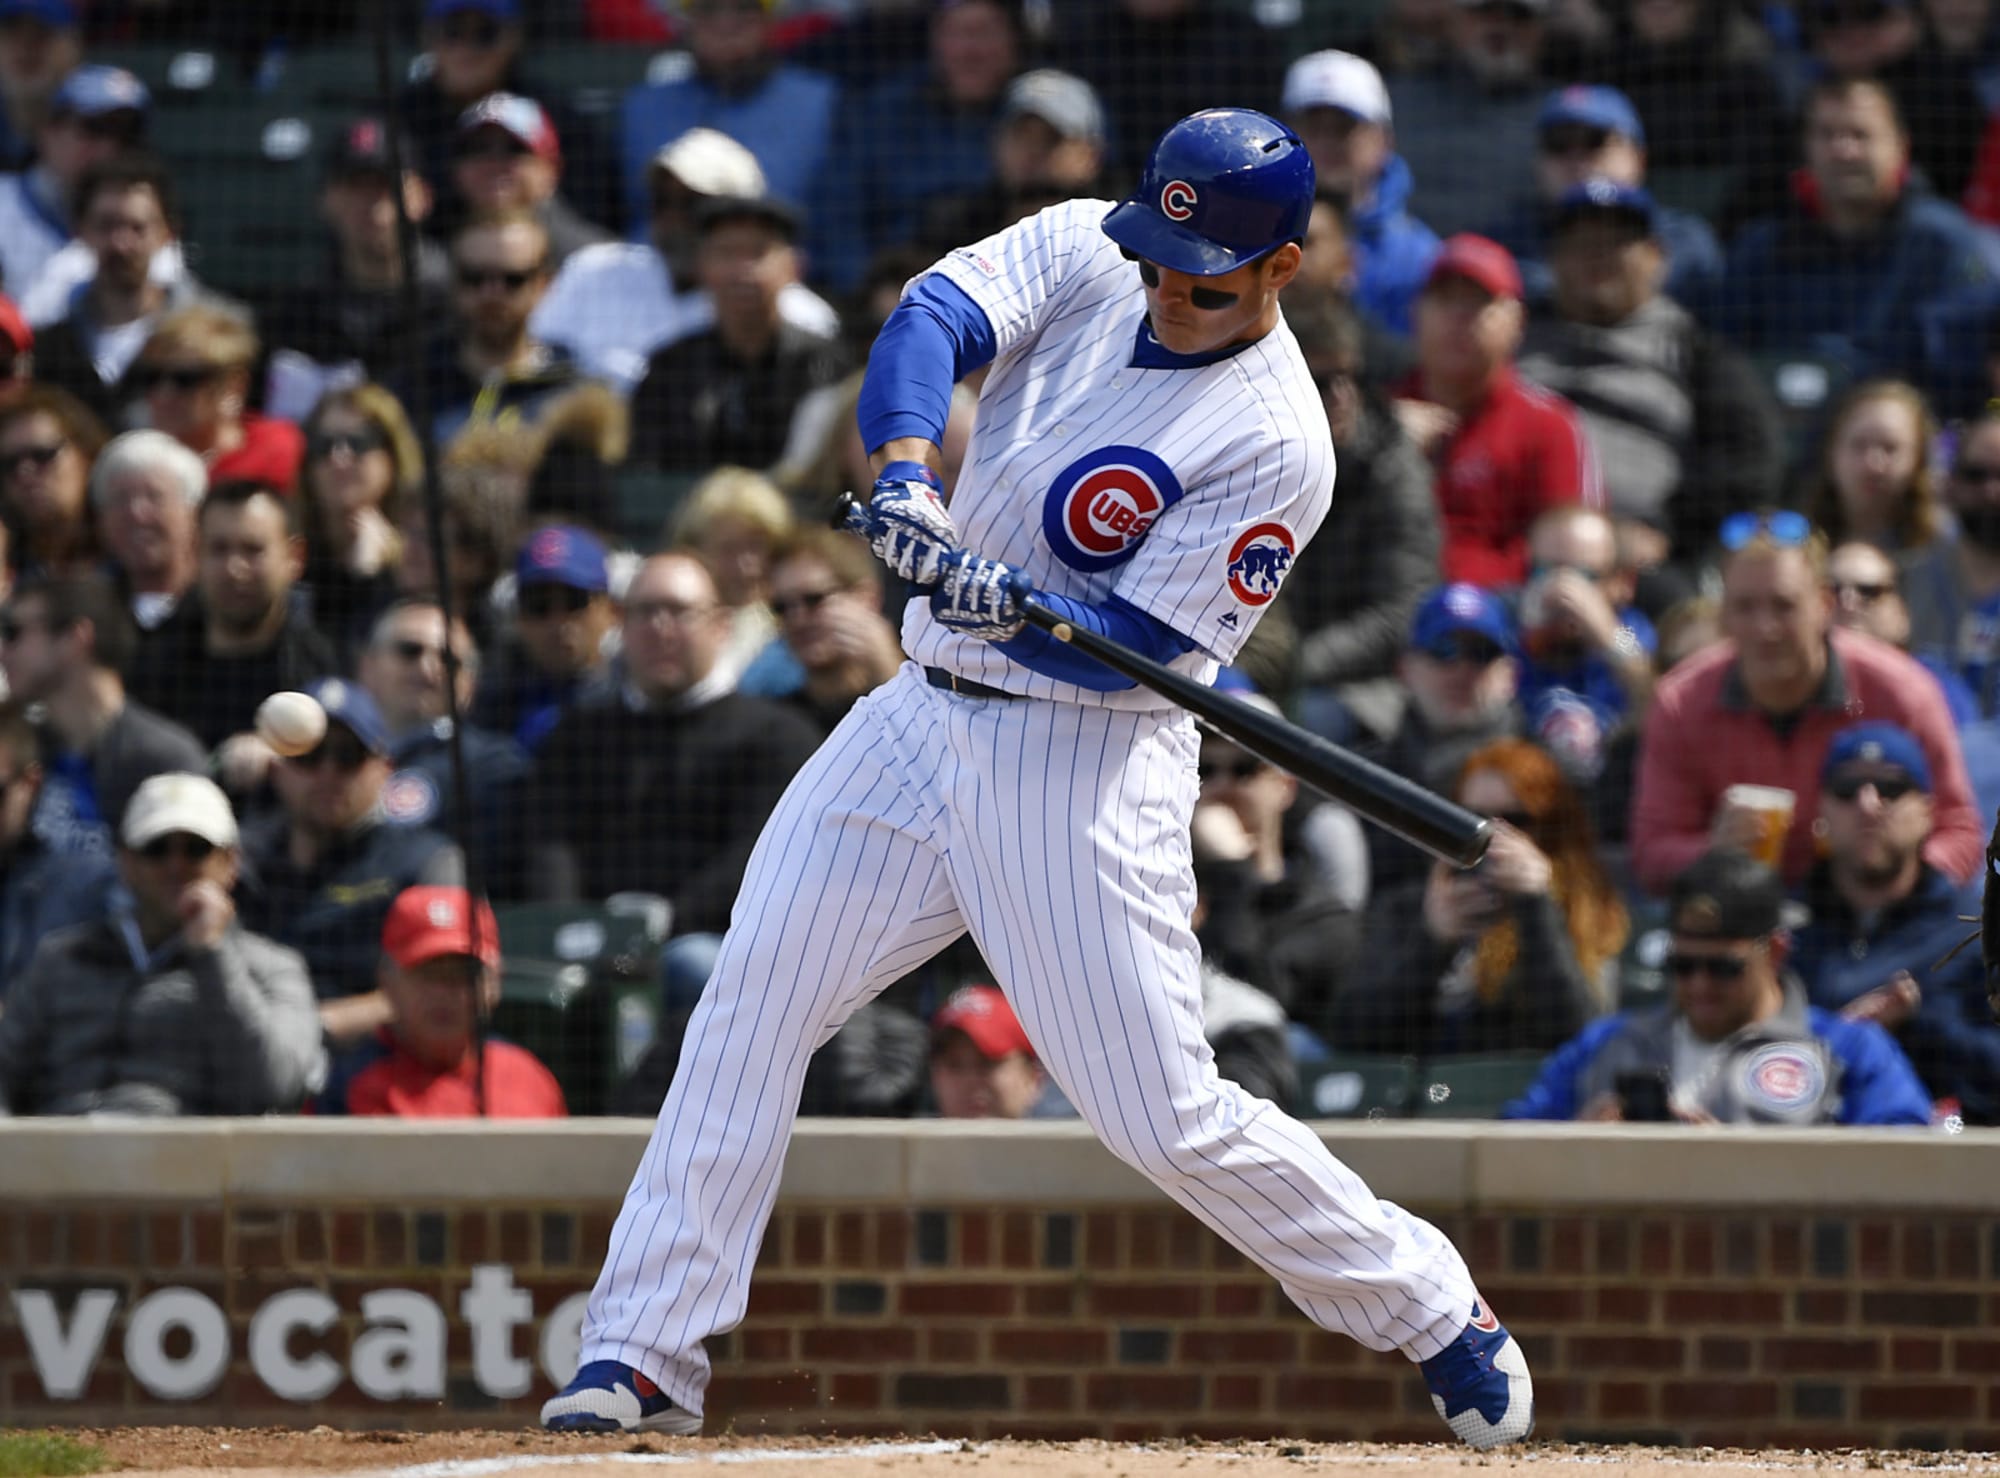 Chicago Cubs: Anthony Rizzo is most important Cub in division race